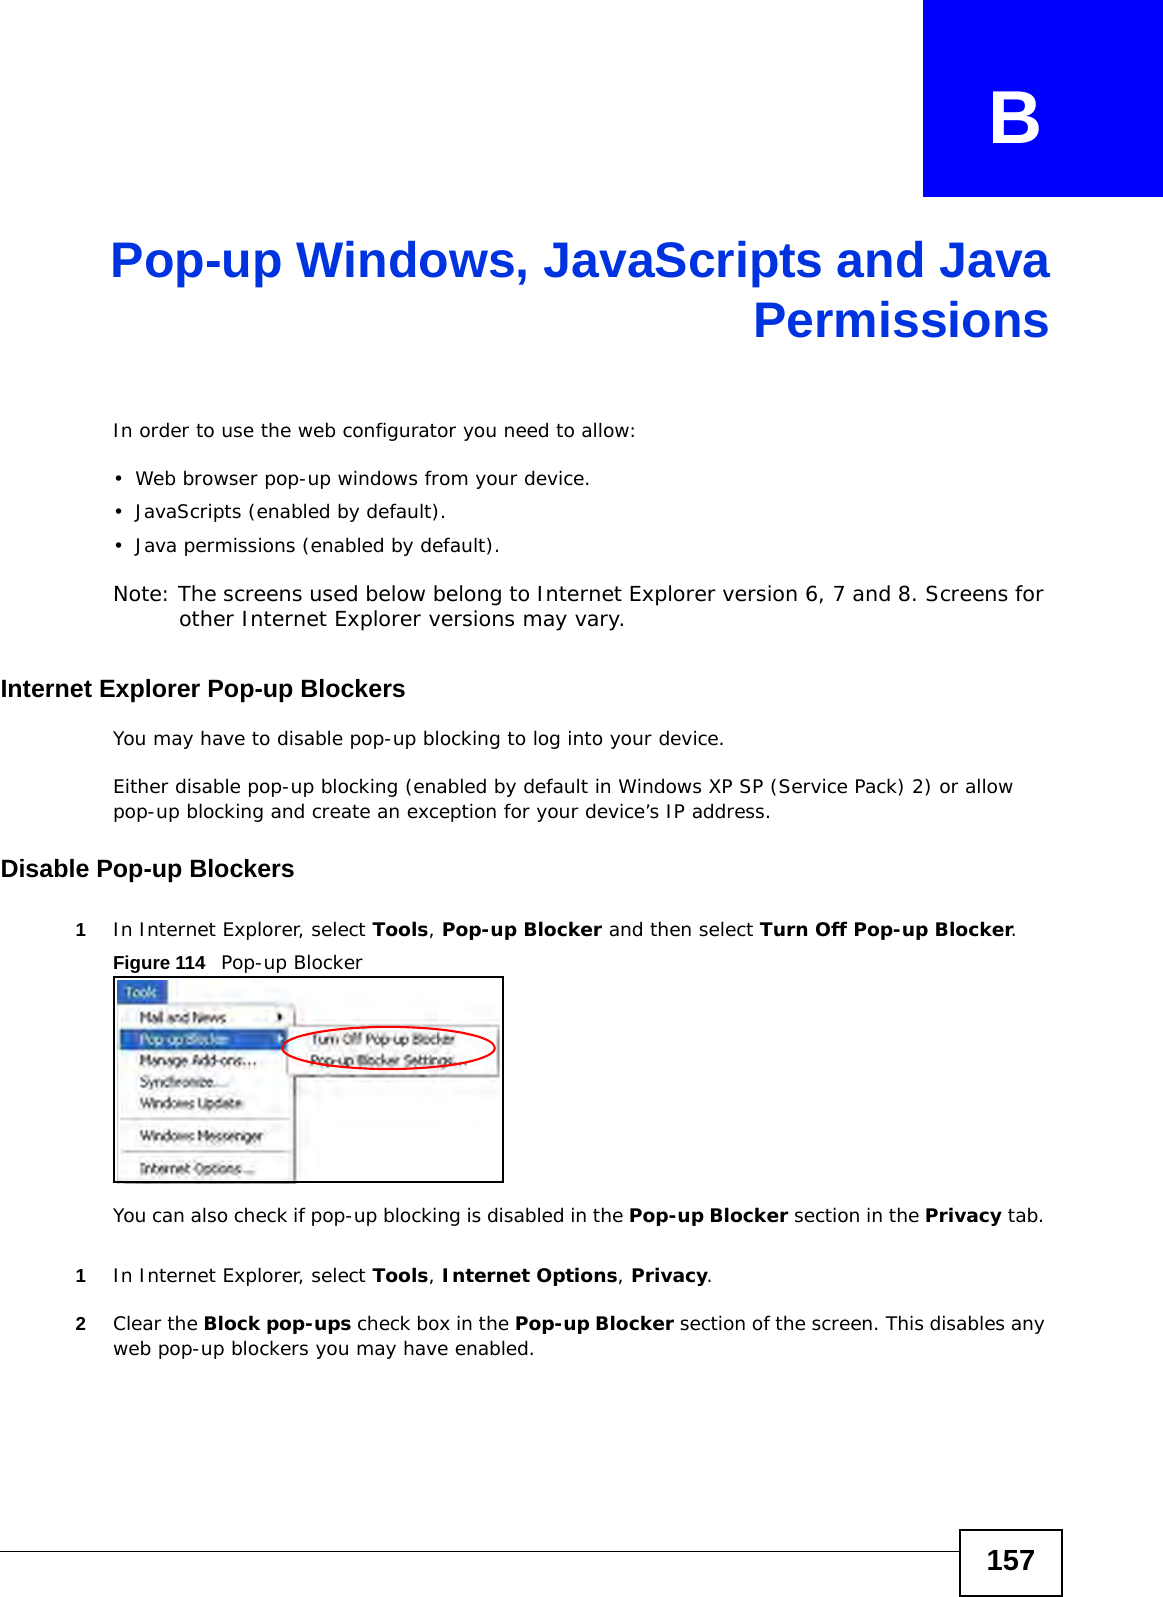 157APPENDIX   BPop-up Windows, JavaScripts and JavaPermissionsIn order to use the web configurator you need to allow:• Web browser pop-up windows from your device.• JavaScripts (enabled by default).• Java permissions (enabled by default).Note: The screens used below belong to Internet Explorer version 6, 7 and 8. Screens for other Internet Explorer versions may vary.Internet Explorer Pop-up BlockersYou may have to disable pop-up blocking to log into your device. Either disable pop-up blocking (enabled by default in Windows XP SP (Service Pack) 2) or allow pop-up blocking and create an exception for your device’s IP address.Disable Pop-up Blockers1In Internet Explorer, select Tools, Pop-up Blocker and then select Turn Off Pop-up Blocker. Figure 114   Pop-up BlockerYou can also check if pop-up blocking is disabled in the Pop-up Blocker section in the Privacy tab. 1In Internet Explorer, select Tools, Internet Options, Privacy.2Clear the Block pop-ups check box in the Pop-up Blocker section of the screen. This disables any web pop-up blockers you may have enabled. 